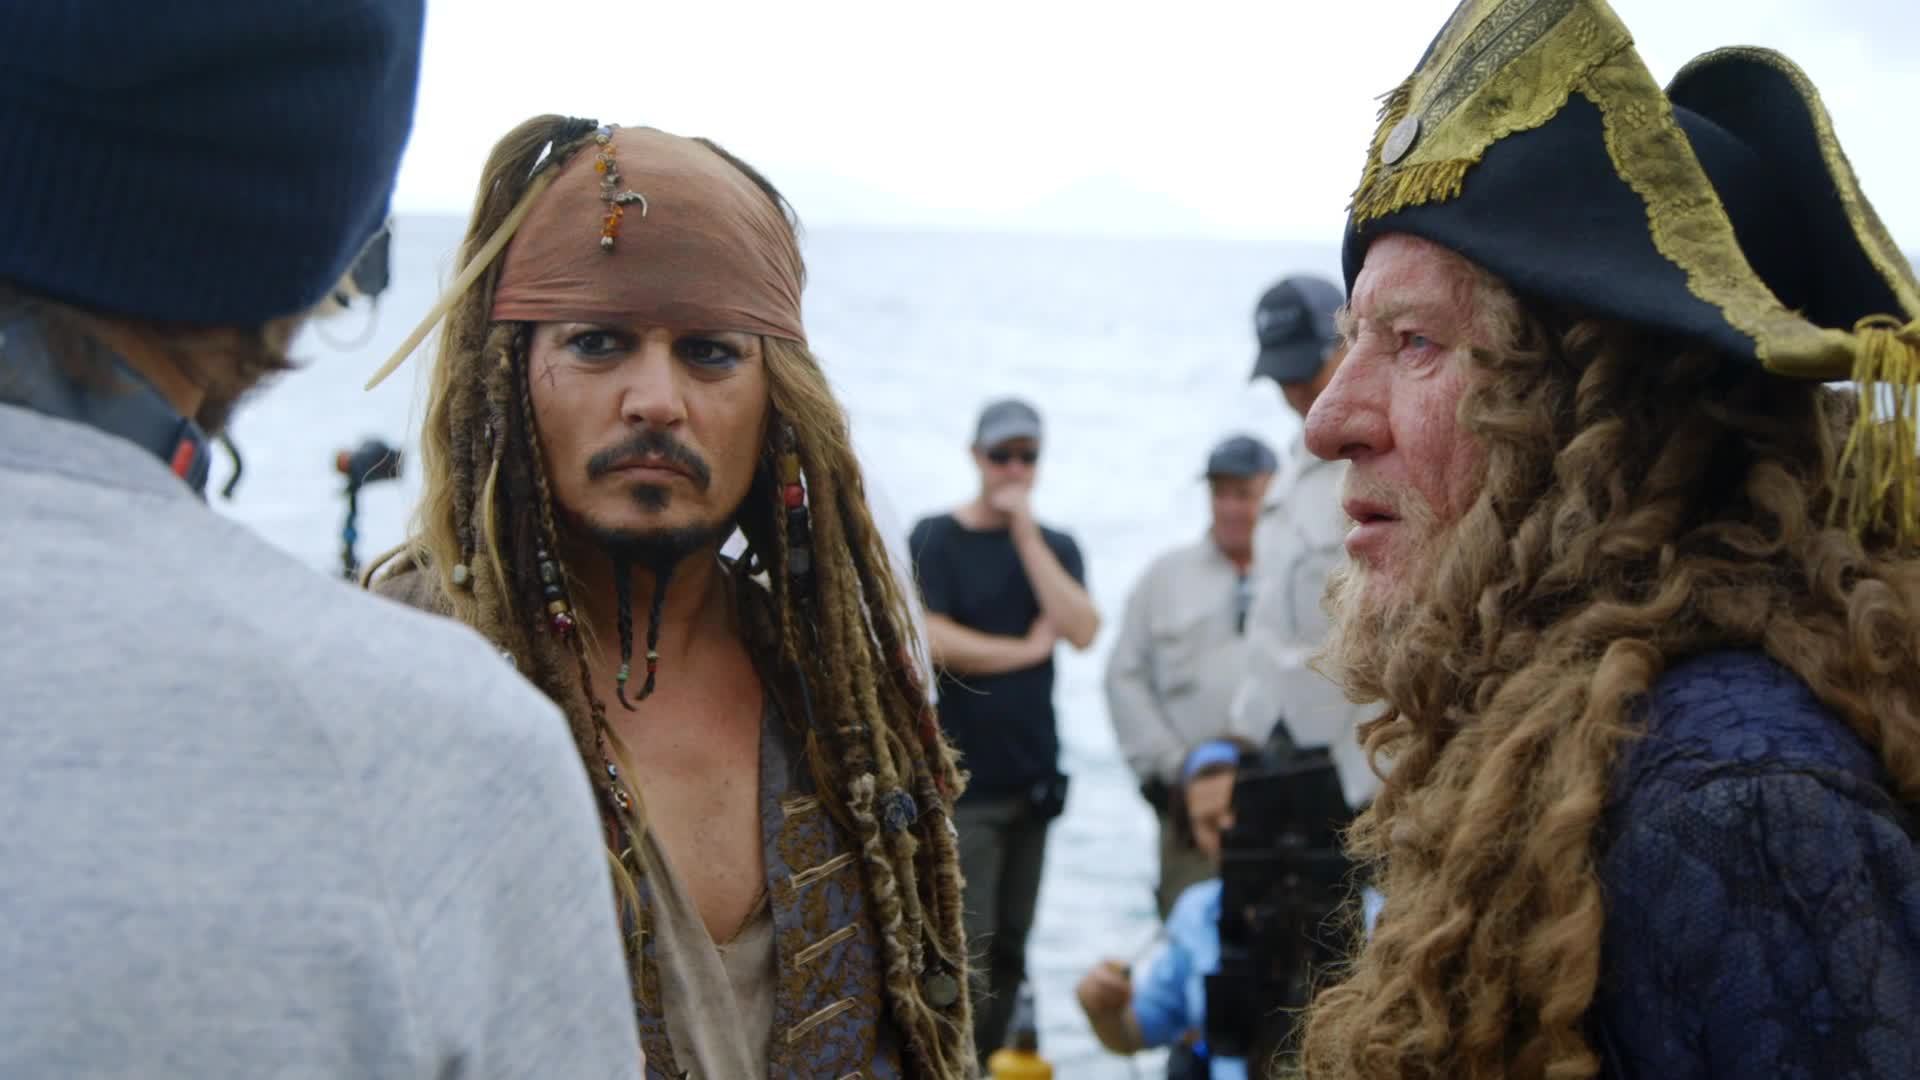 Special Look: PIRATES OF THE CARIBBEAN: DEAD MEN TELL NO TALES